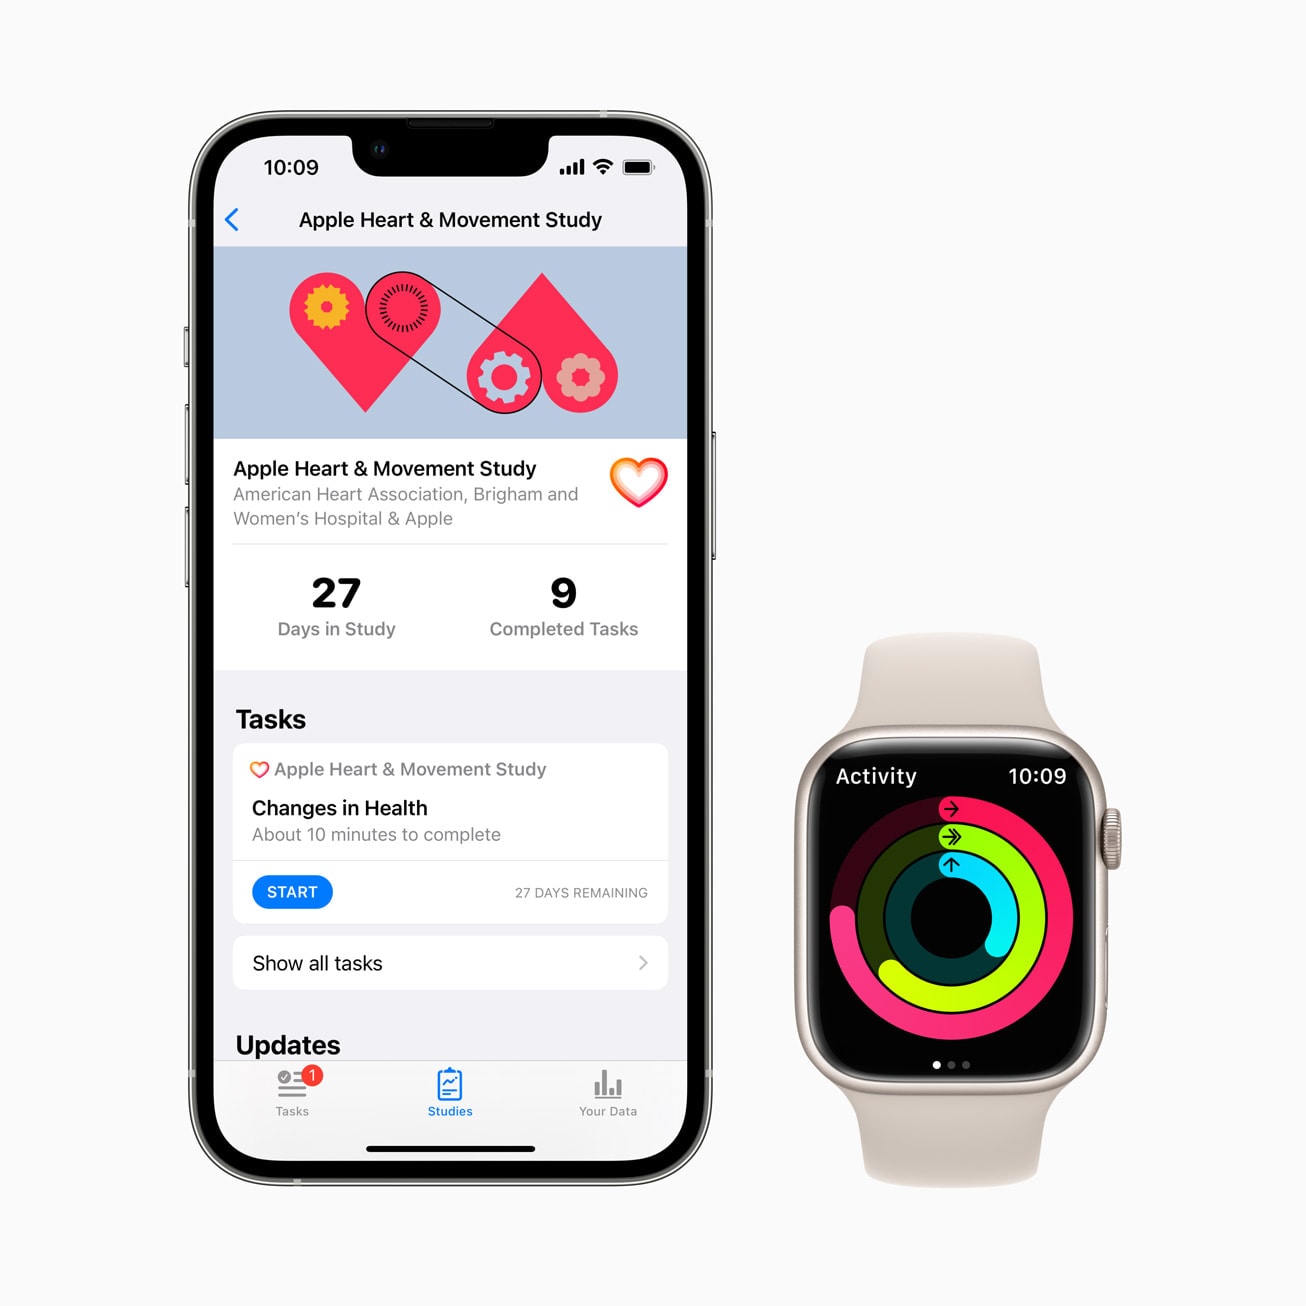 In collaboration with the American Heart Association and Brigham and Women’s Hospital, the Apple Heart and Movement Study explores the link between physical activity and heart health.